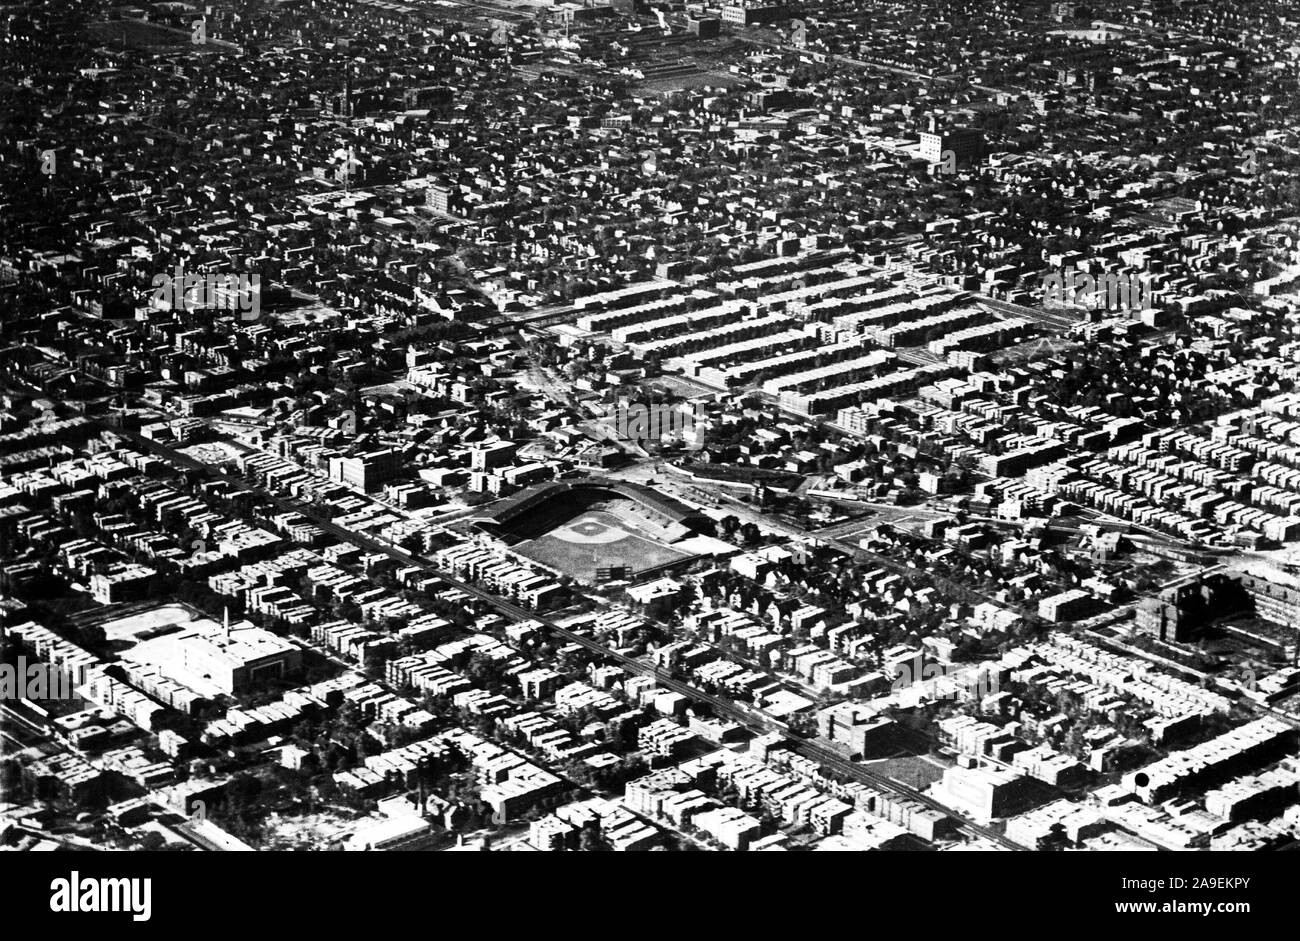 Aerial Photograph of the North Side of Chicago, Illinois 1919 - Weeghman Park (present day Wrigley Field) can be seen in the middle of image. Stock Photo